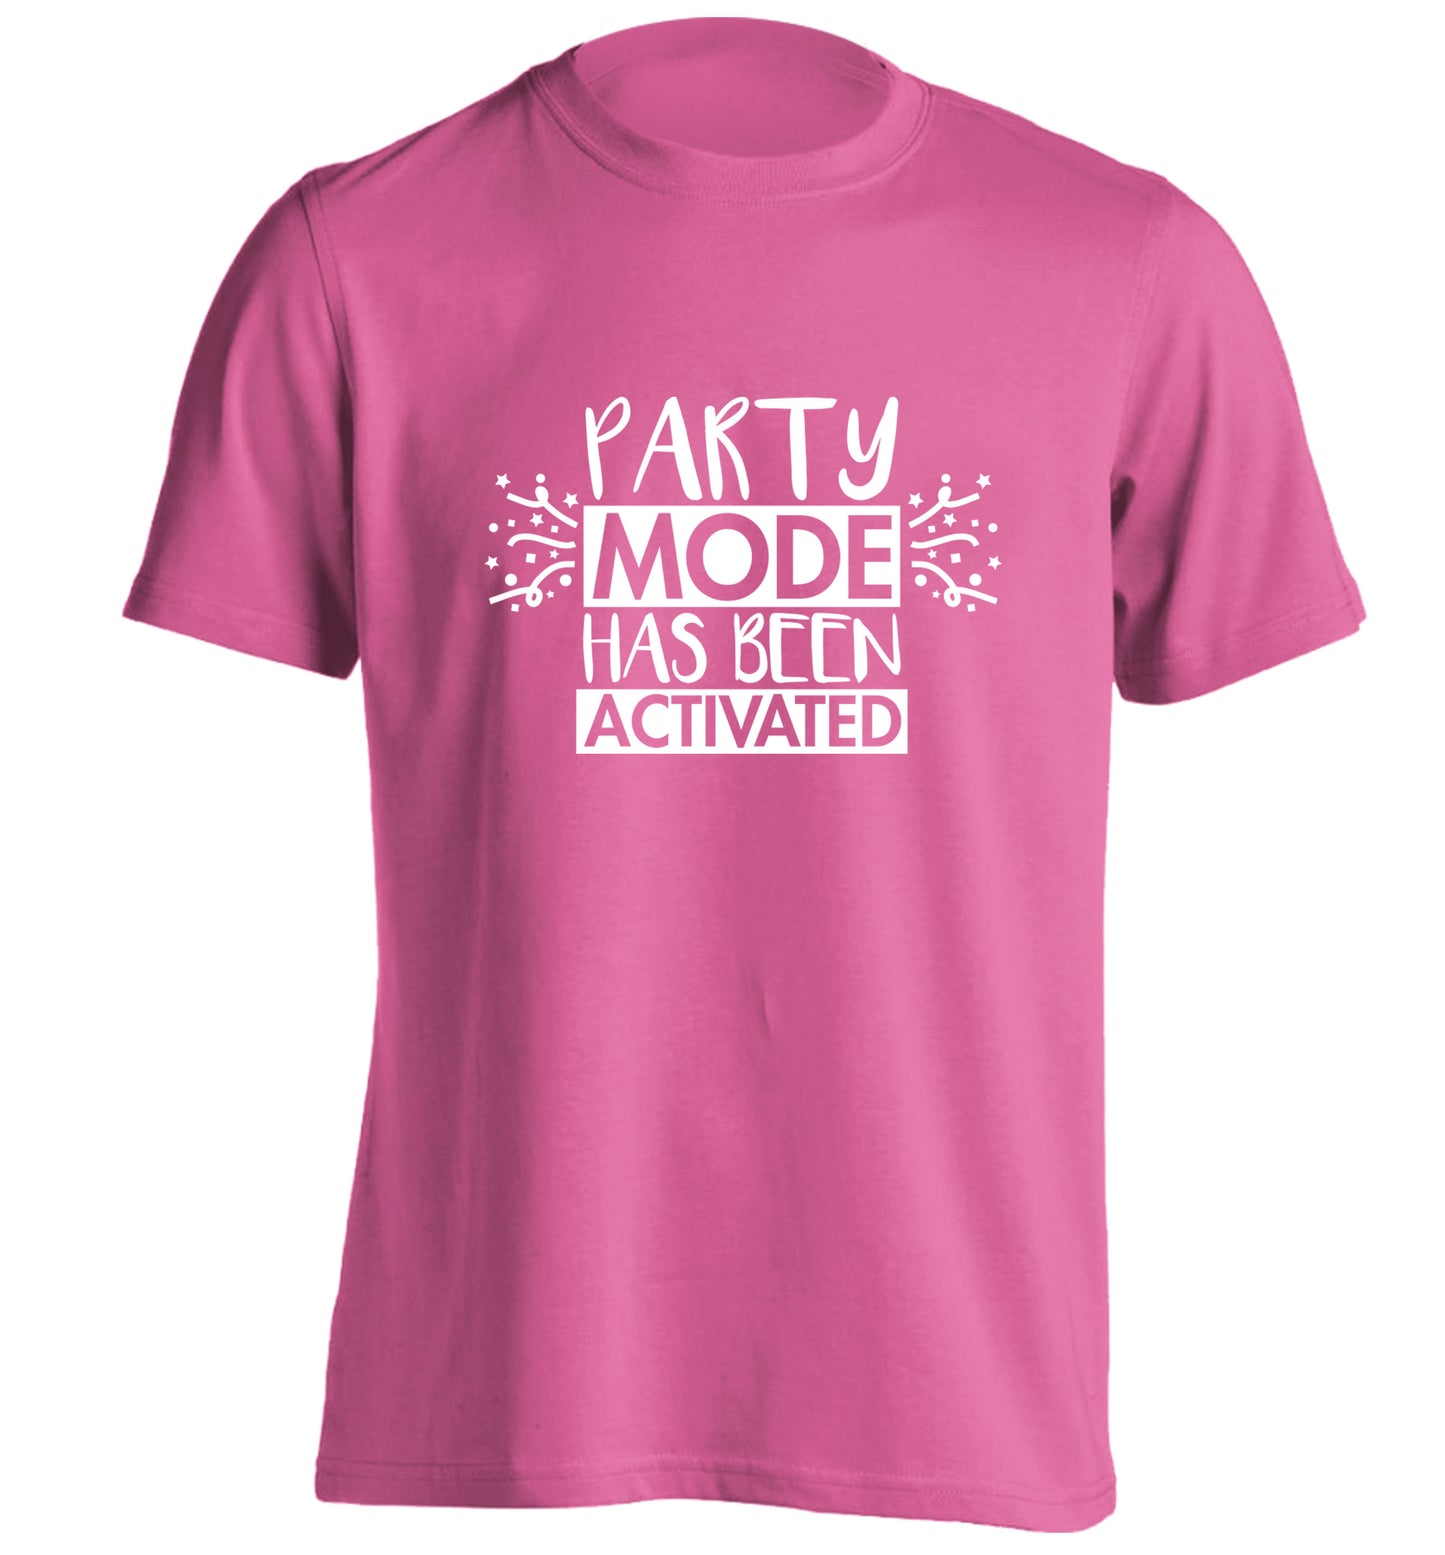 Please do not disturb party mode has been activated adults unisex pink Tshirt 2XL